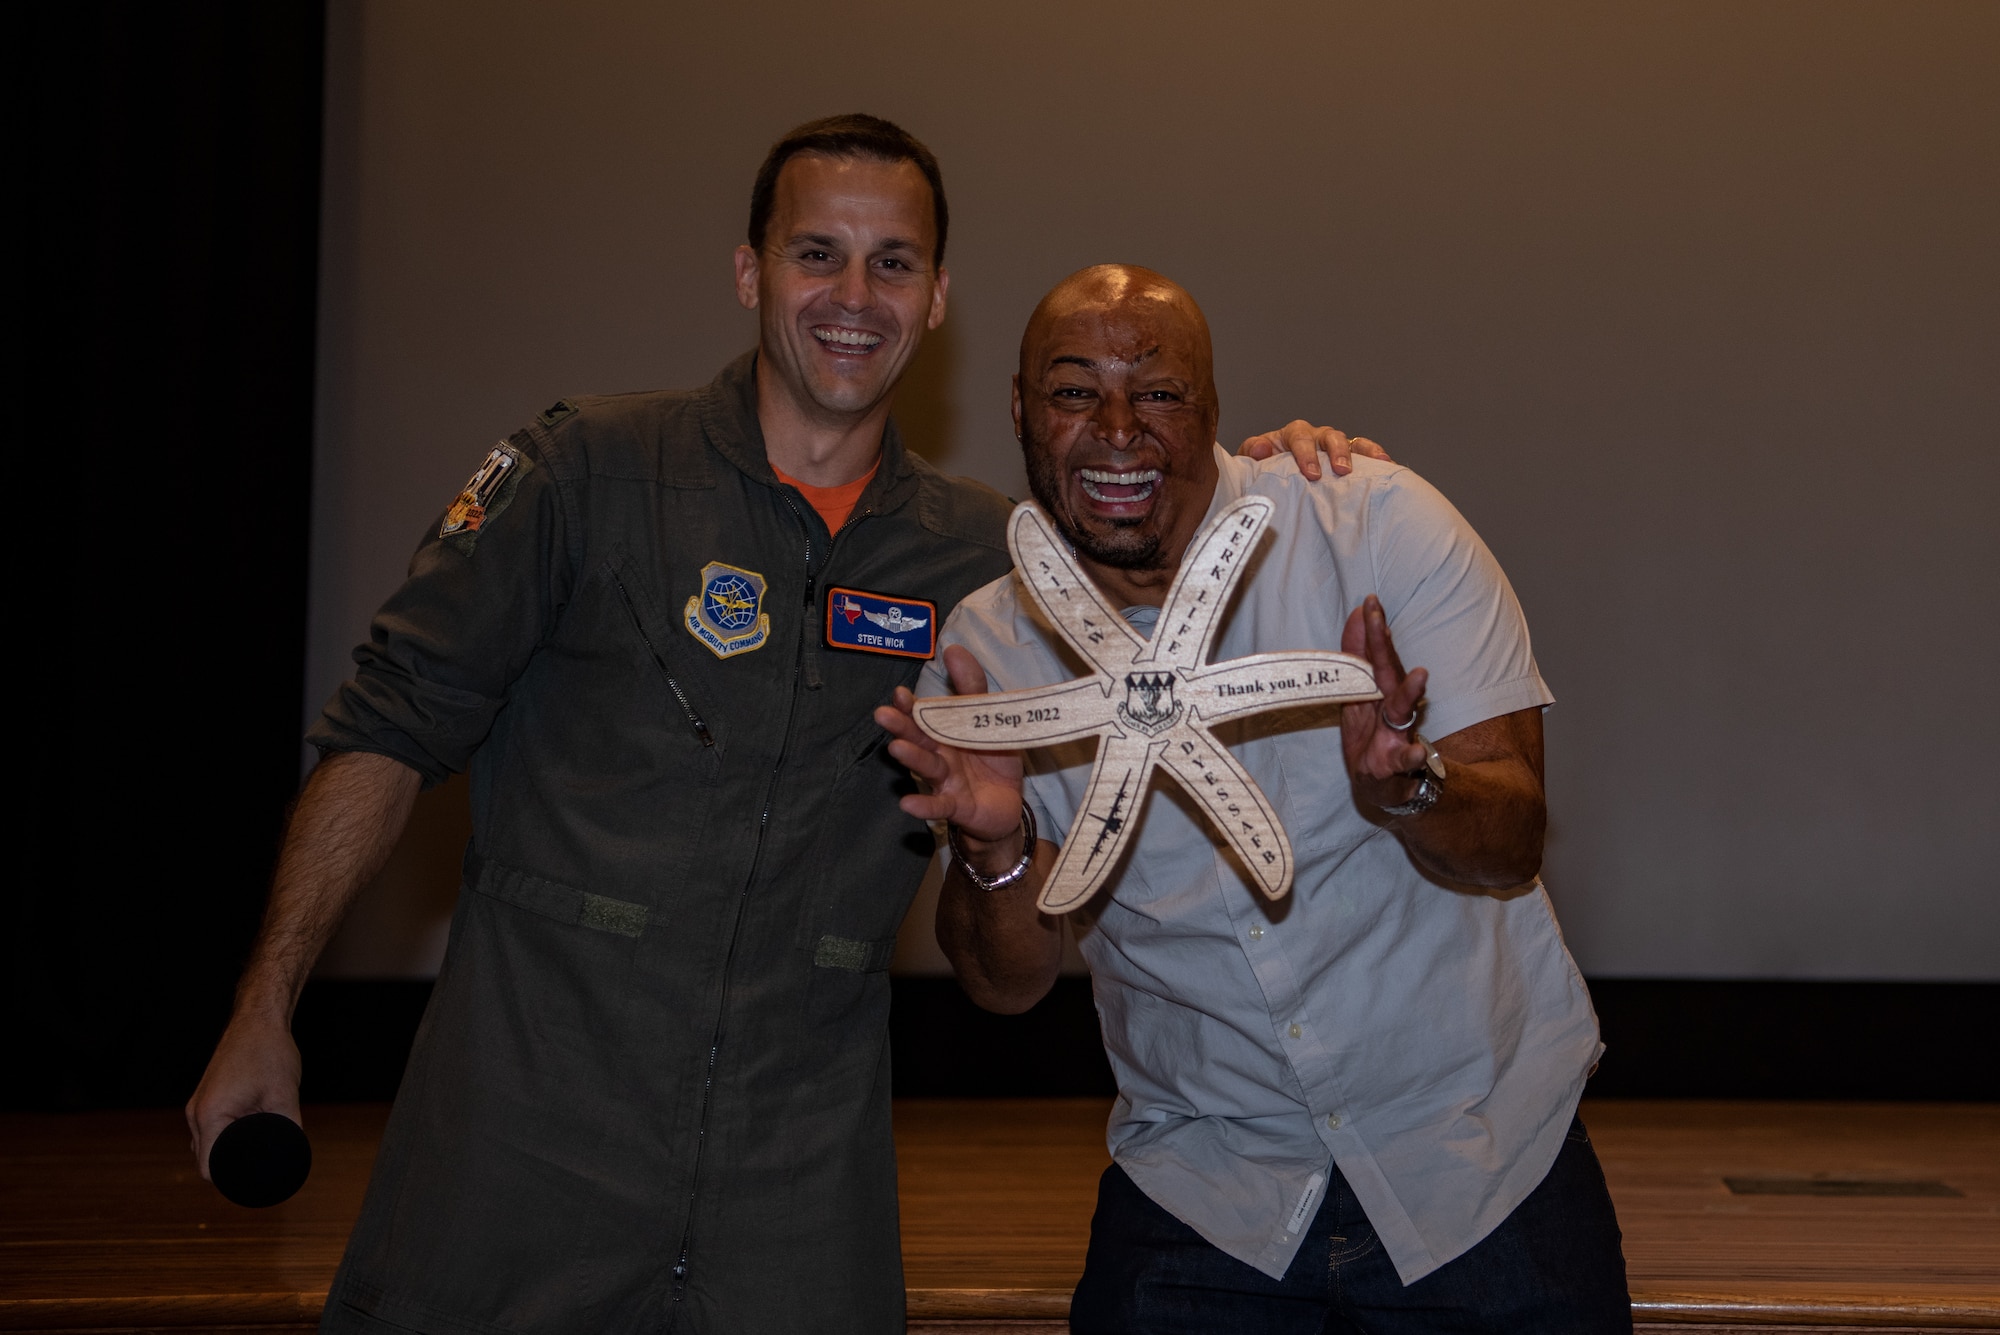 Col. Steven Wick, 317th Airlift Wing vice commander gifts J.R. Martinez, a combat veteran and motivational speaker, during the 317th AW resiliency training day at Dyess Air Force Base, Texas, Sept. 23, 2022. The 317th AW reached out to Martinez to speak to the Airmen about resiliency. (U.S. Air Force photo by Airman 1st Class Ryan Hayman)